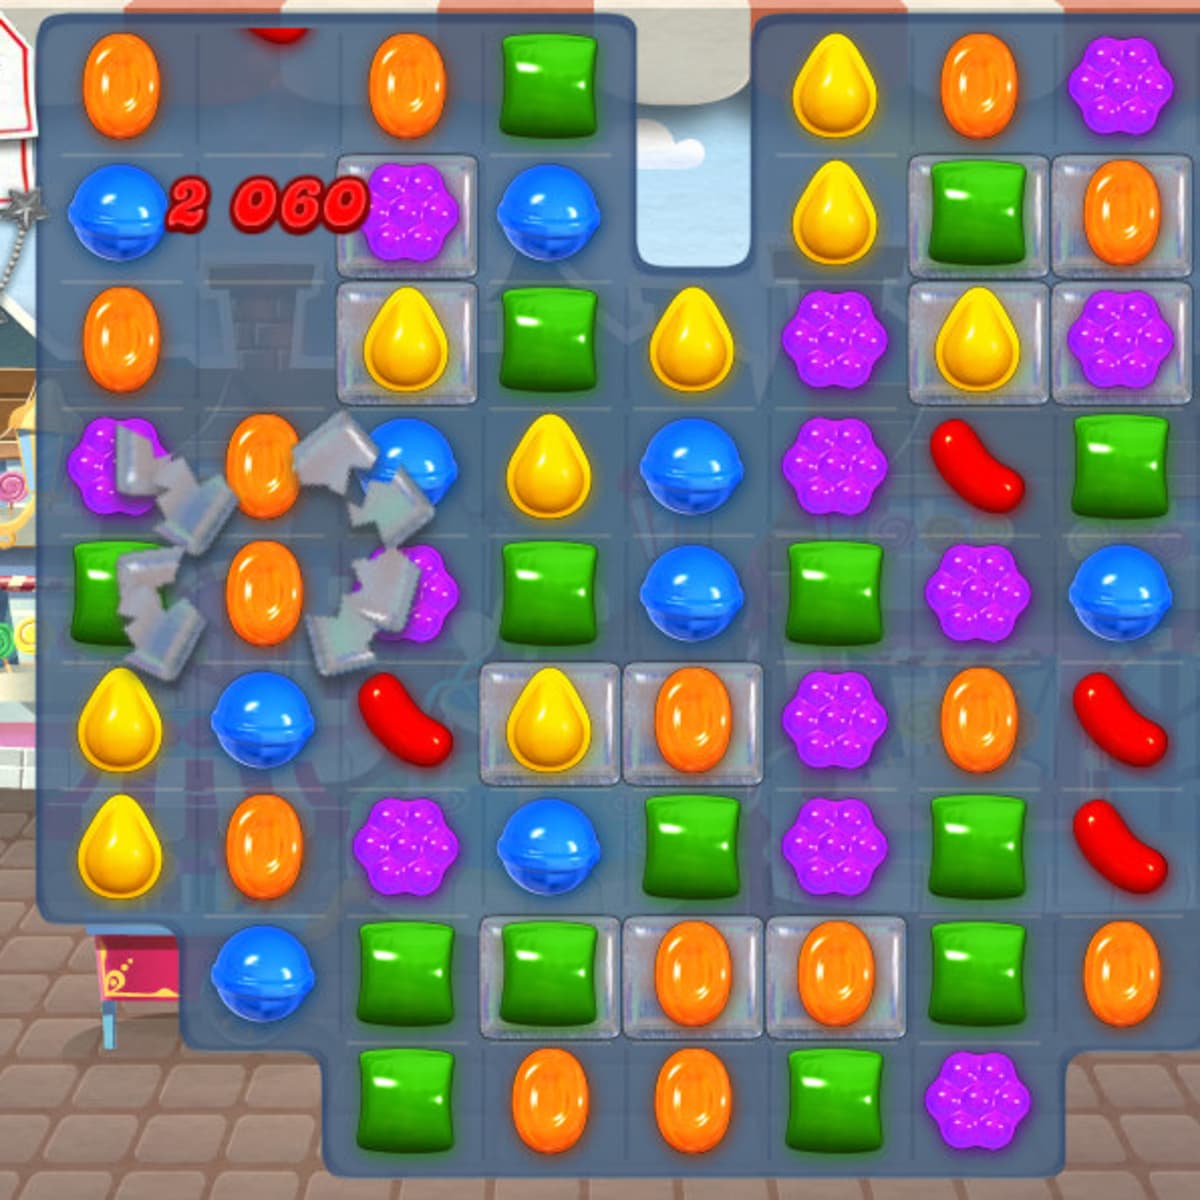 If you can finish this, you're ready - Candy Crush Saga